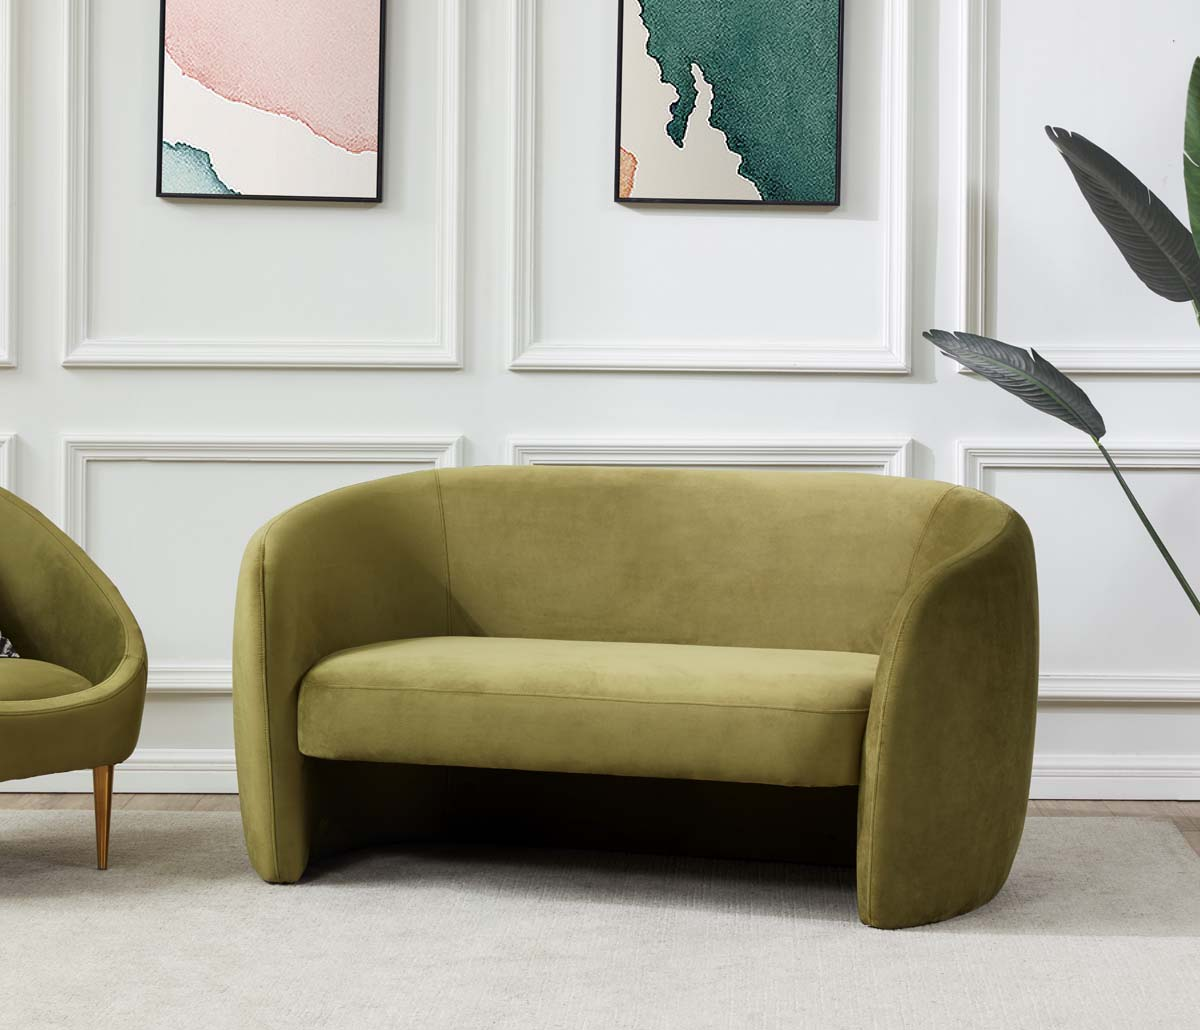 Safavieh Couture Zhao Curved Loveseat - Olive Green